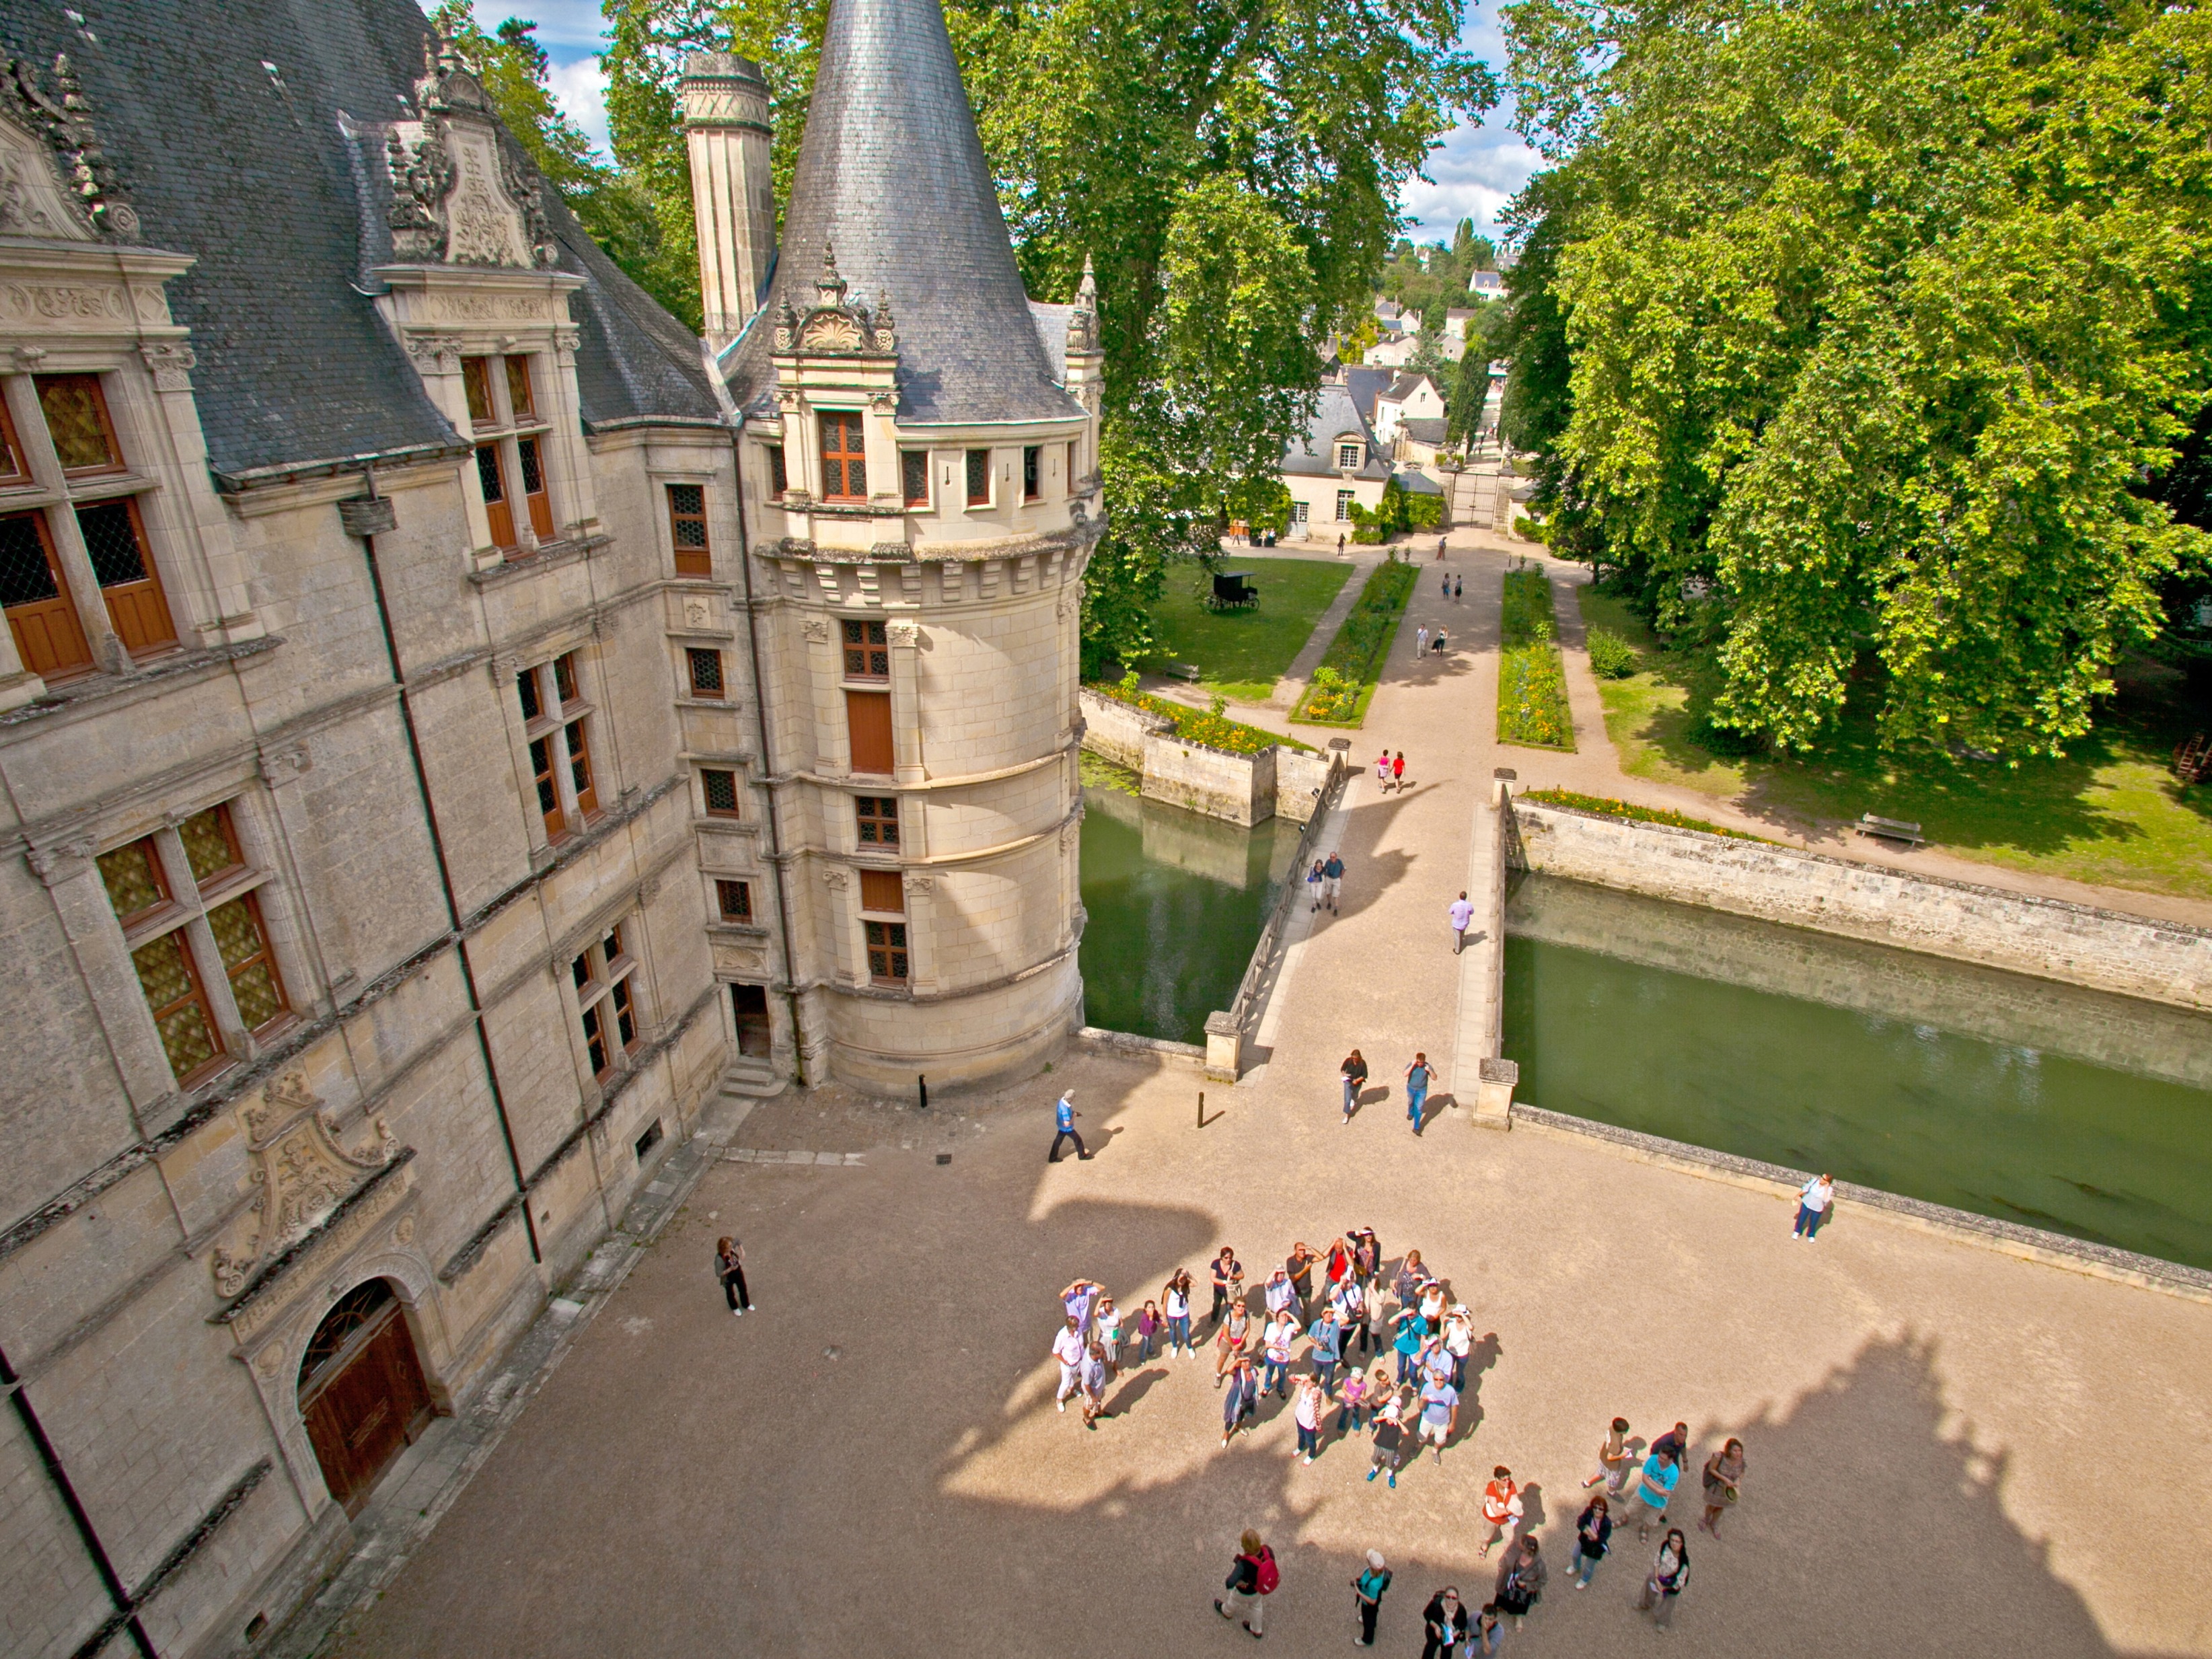 Cycle to the castle of Azay-le-Rideau and take a relaxing walk, for even greater historic discoveries (photo © Atout France Franck Charel).